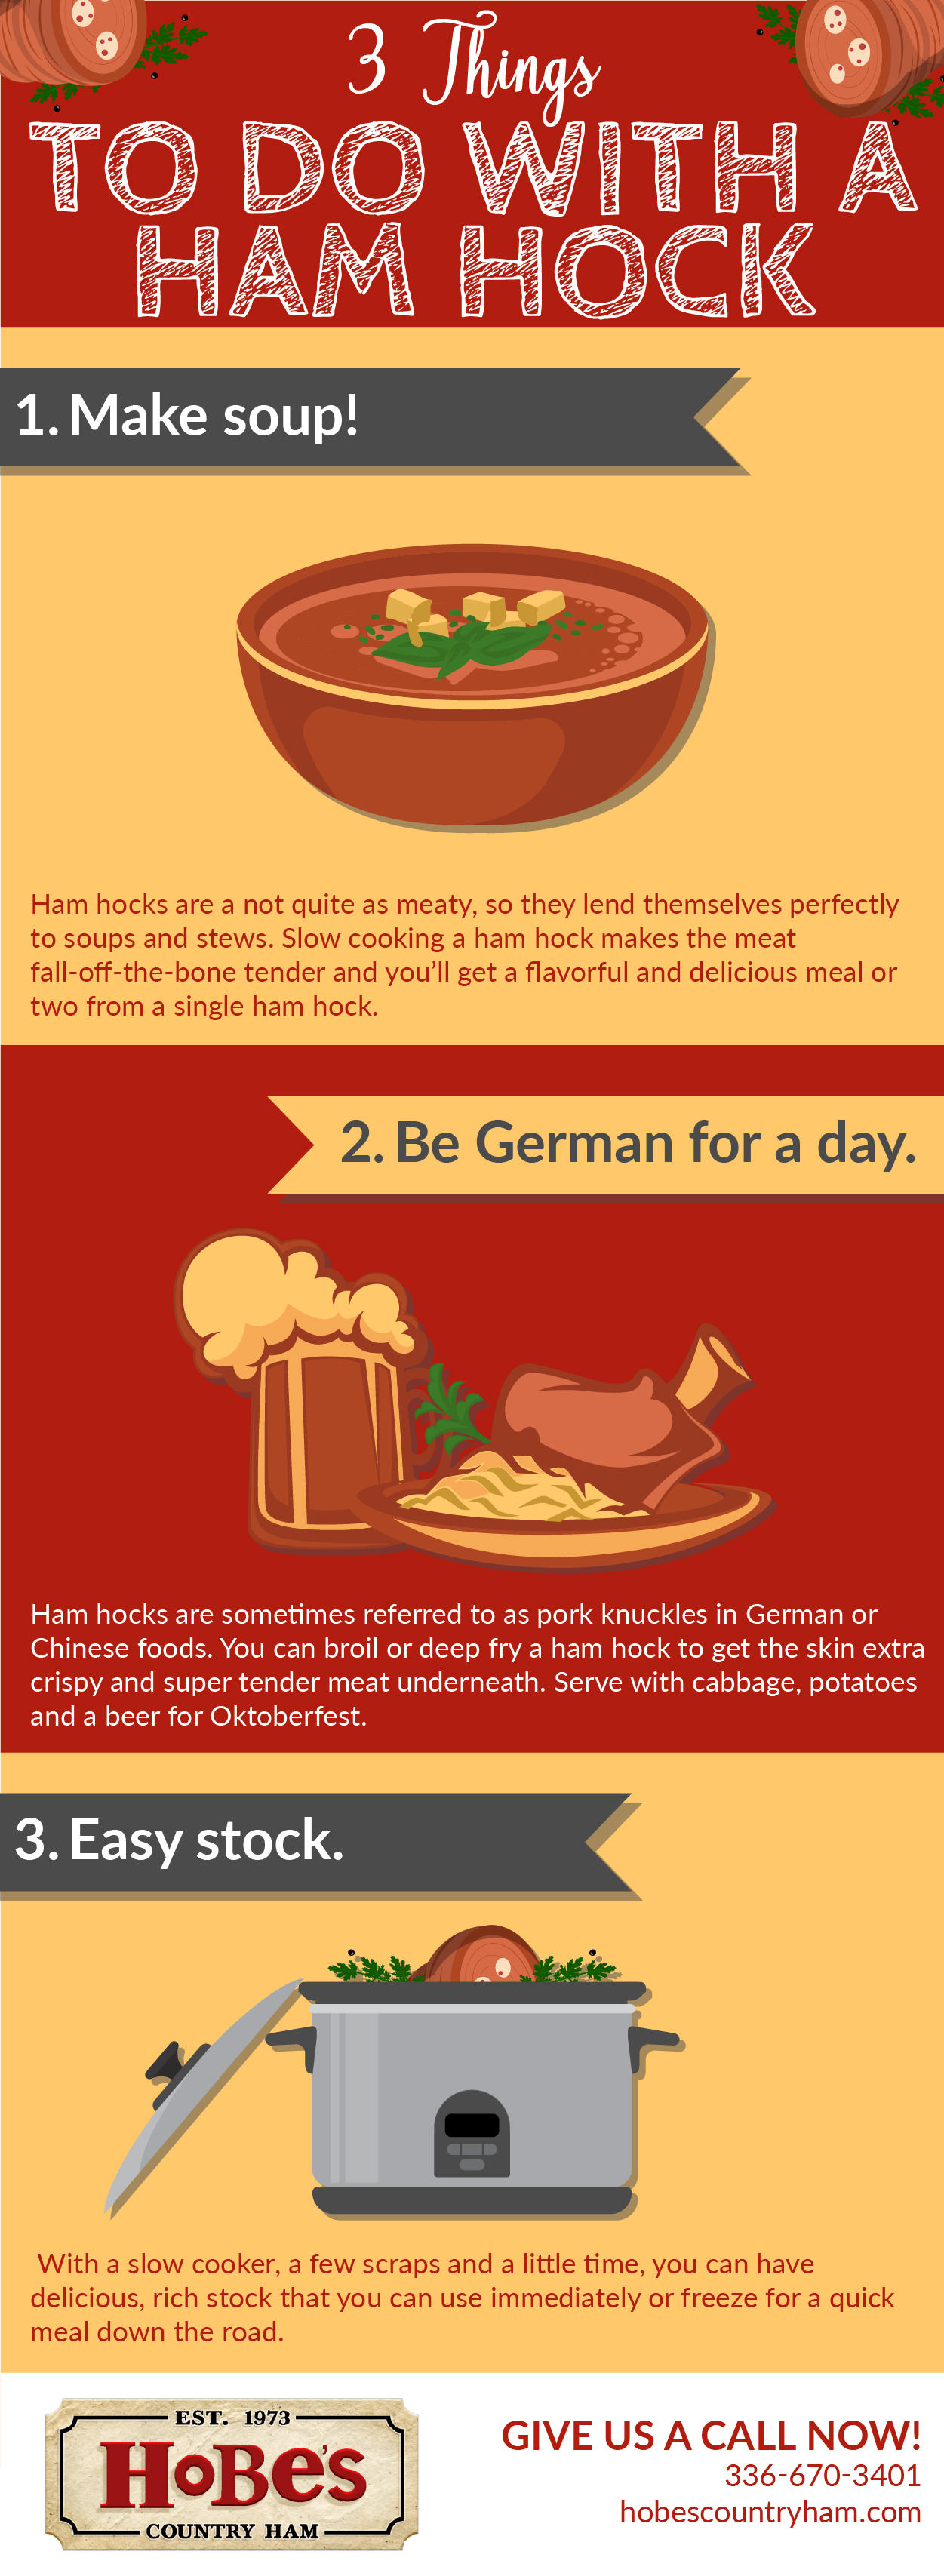 3 Things to Do with a Ham Hock